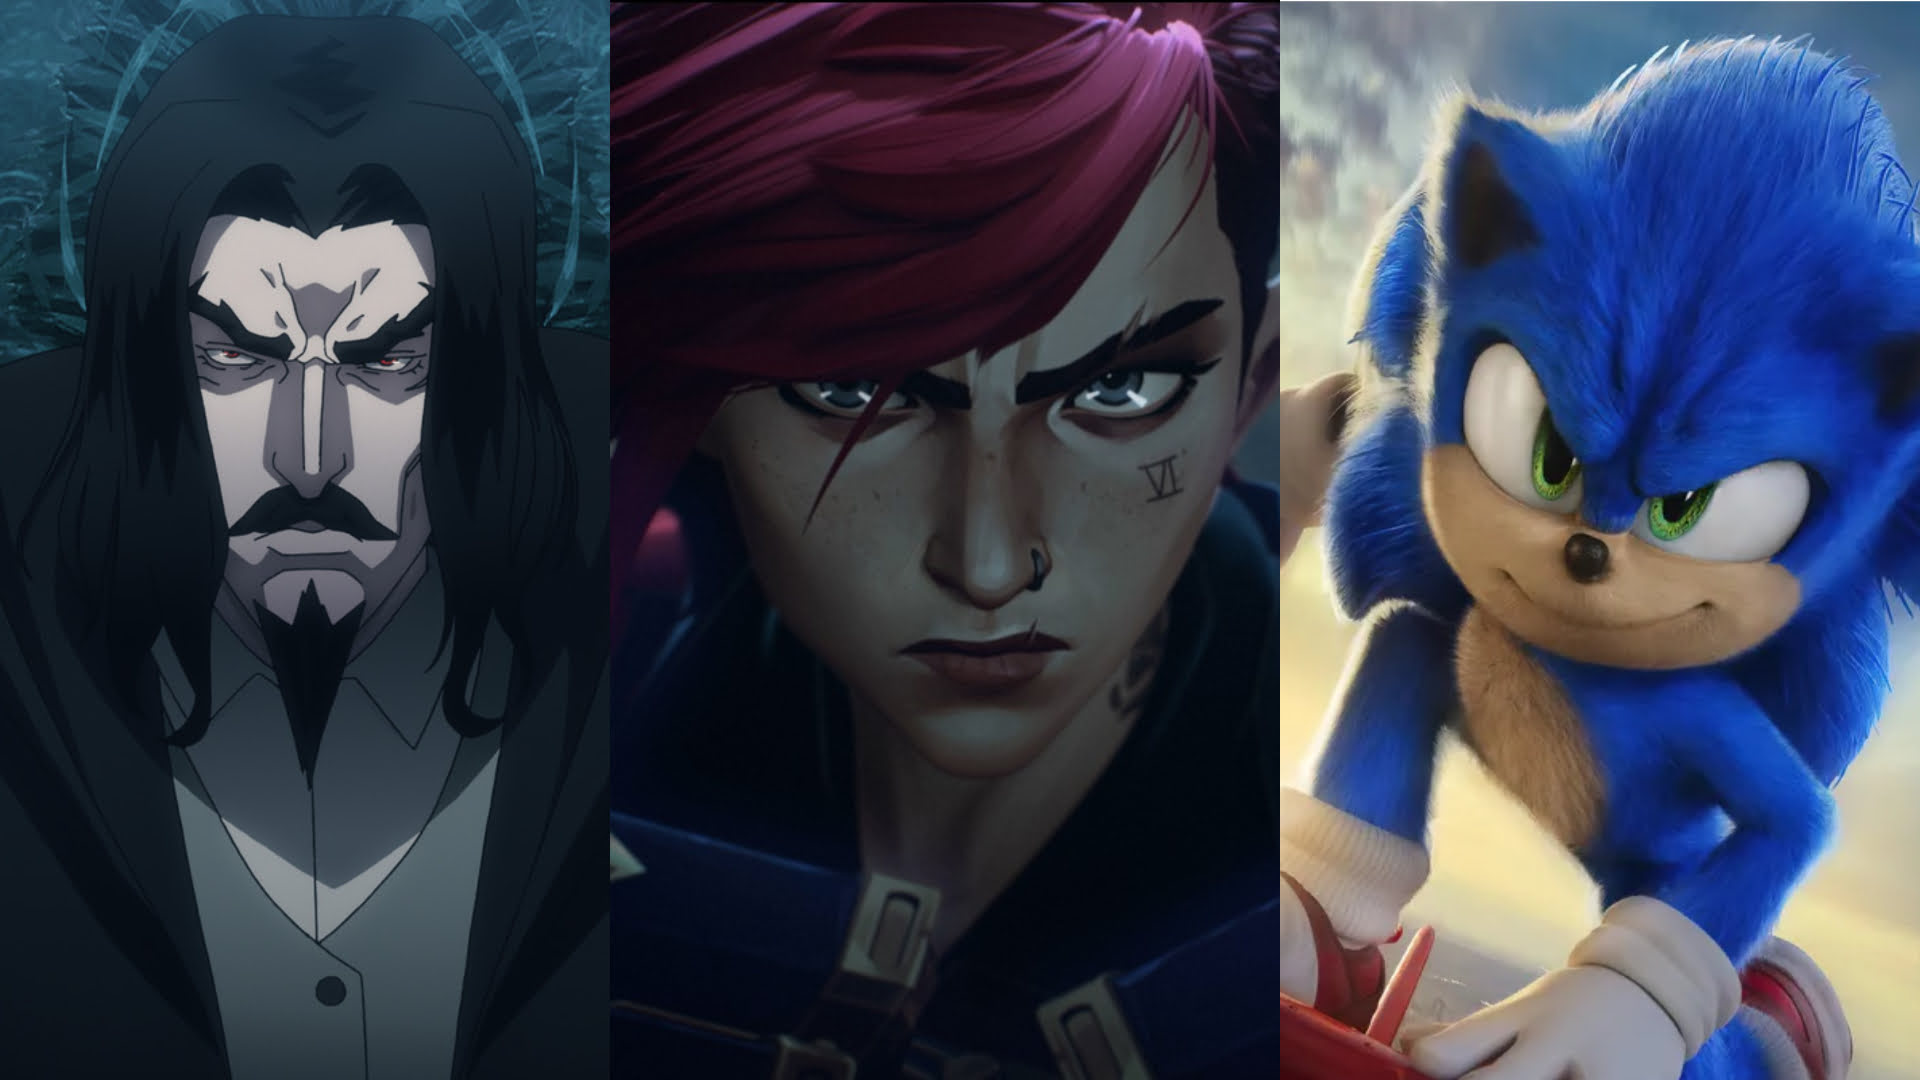 Dracula, Vi, And Sonic From Castlevania, Arcane, And Sonic The Hedgehog